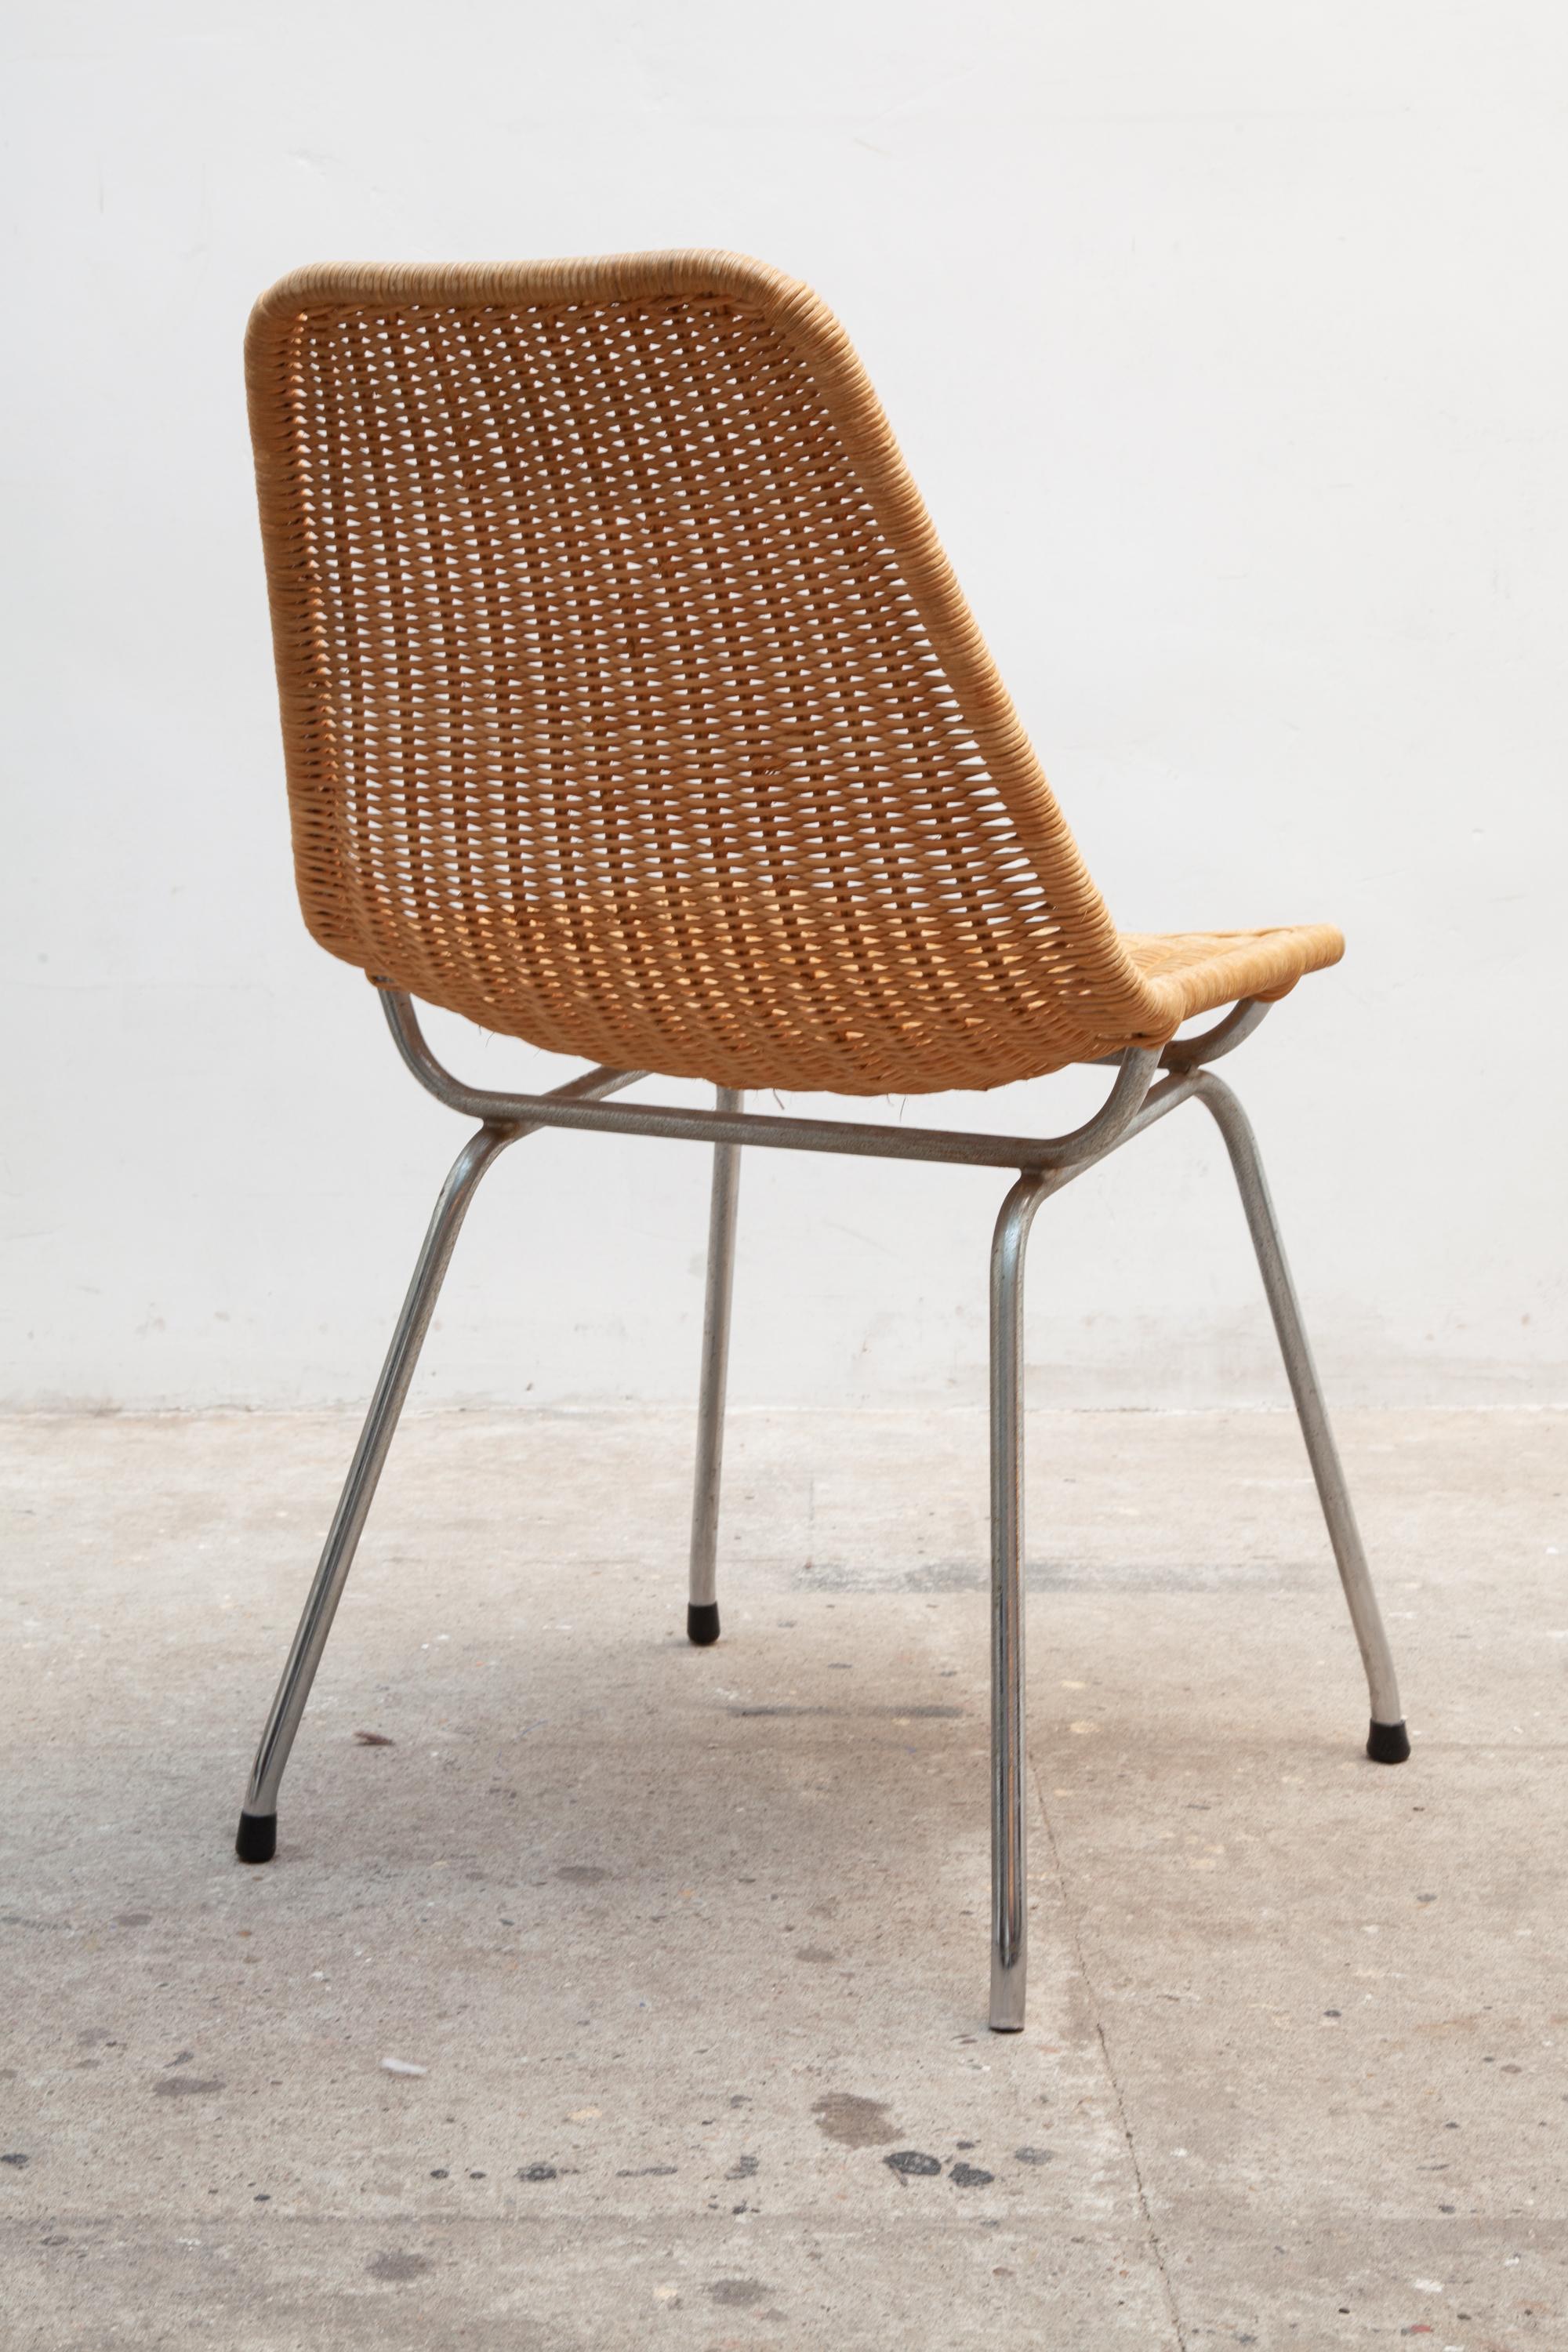 Dutch Set of Four Wicker Shell Chairs and Metal Crome Frame by Dirk Van Sliedrecht